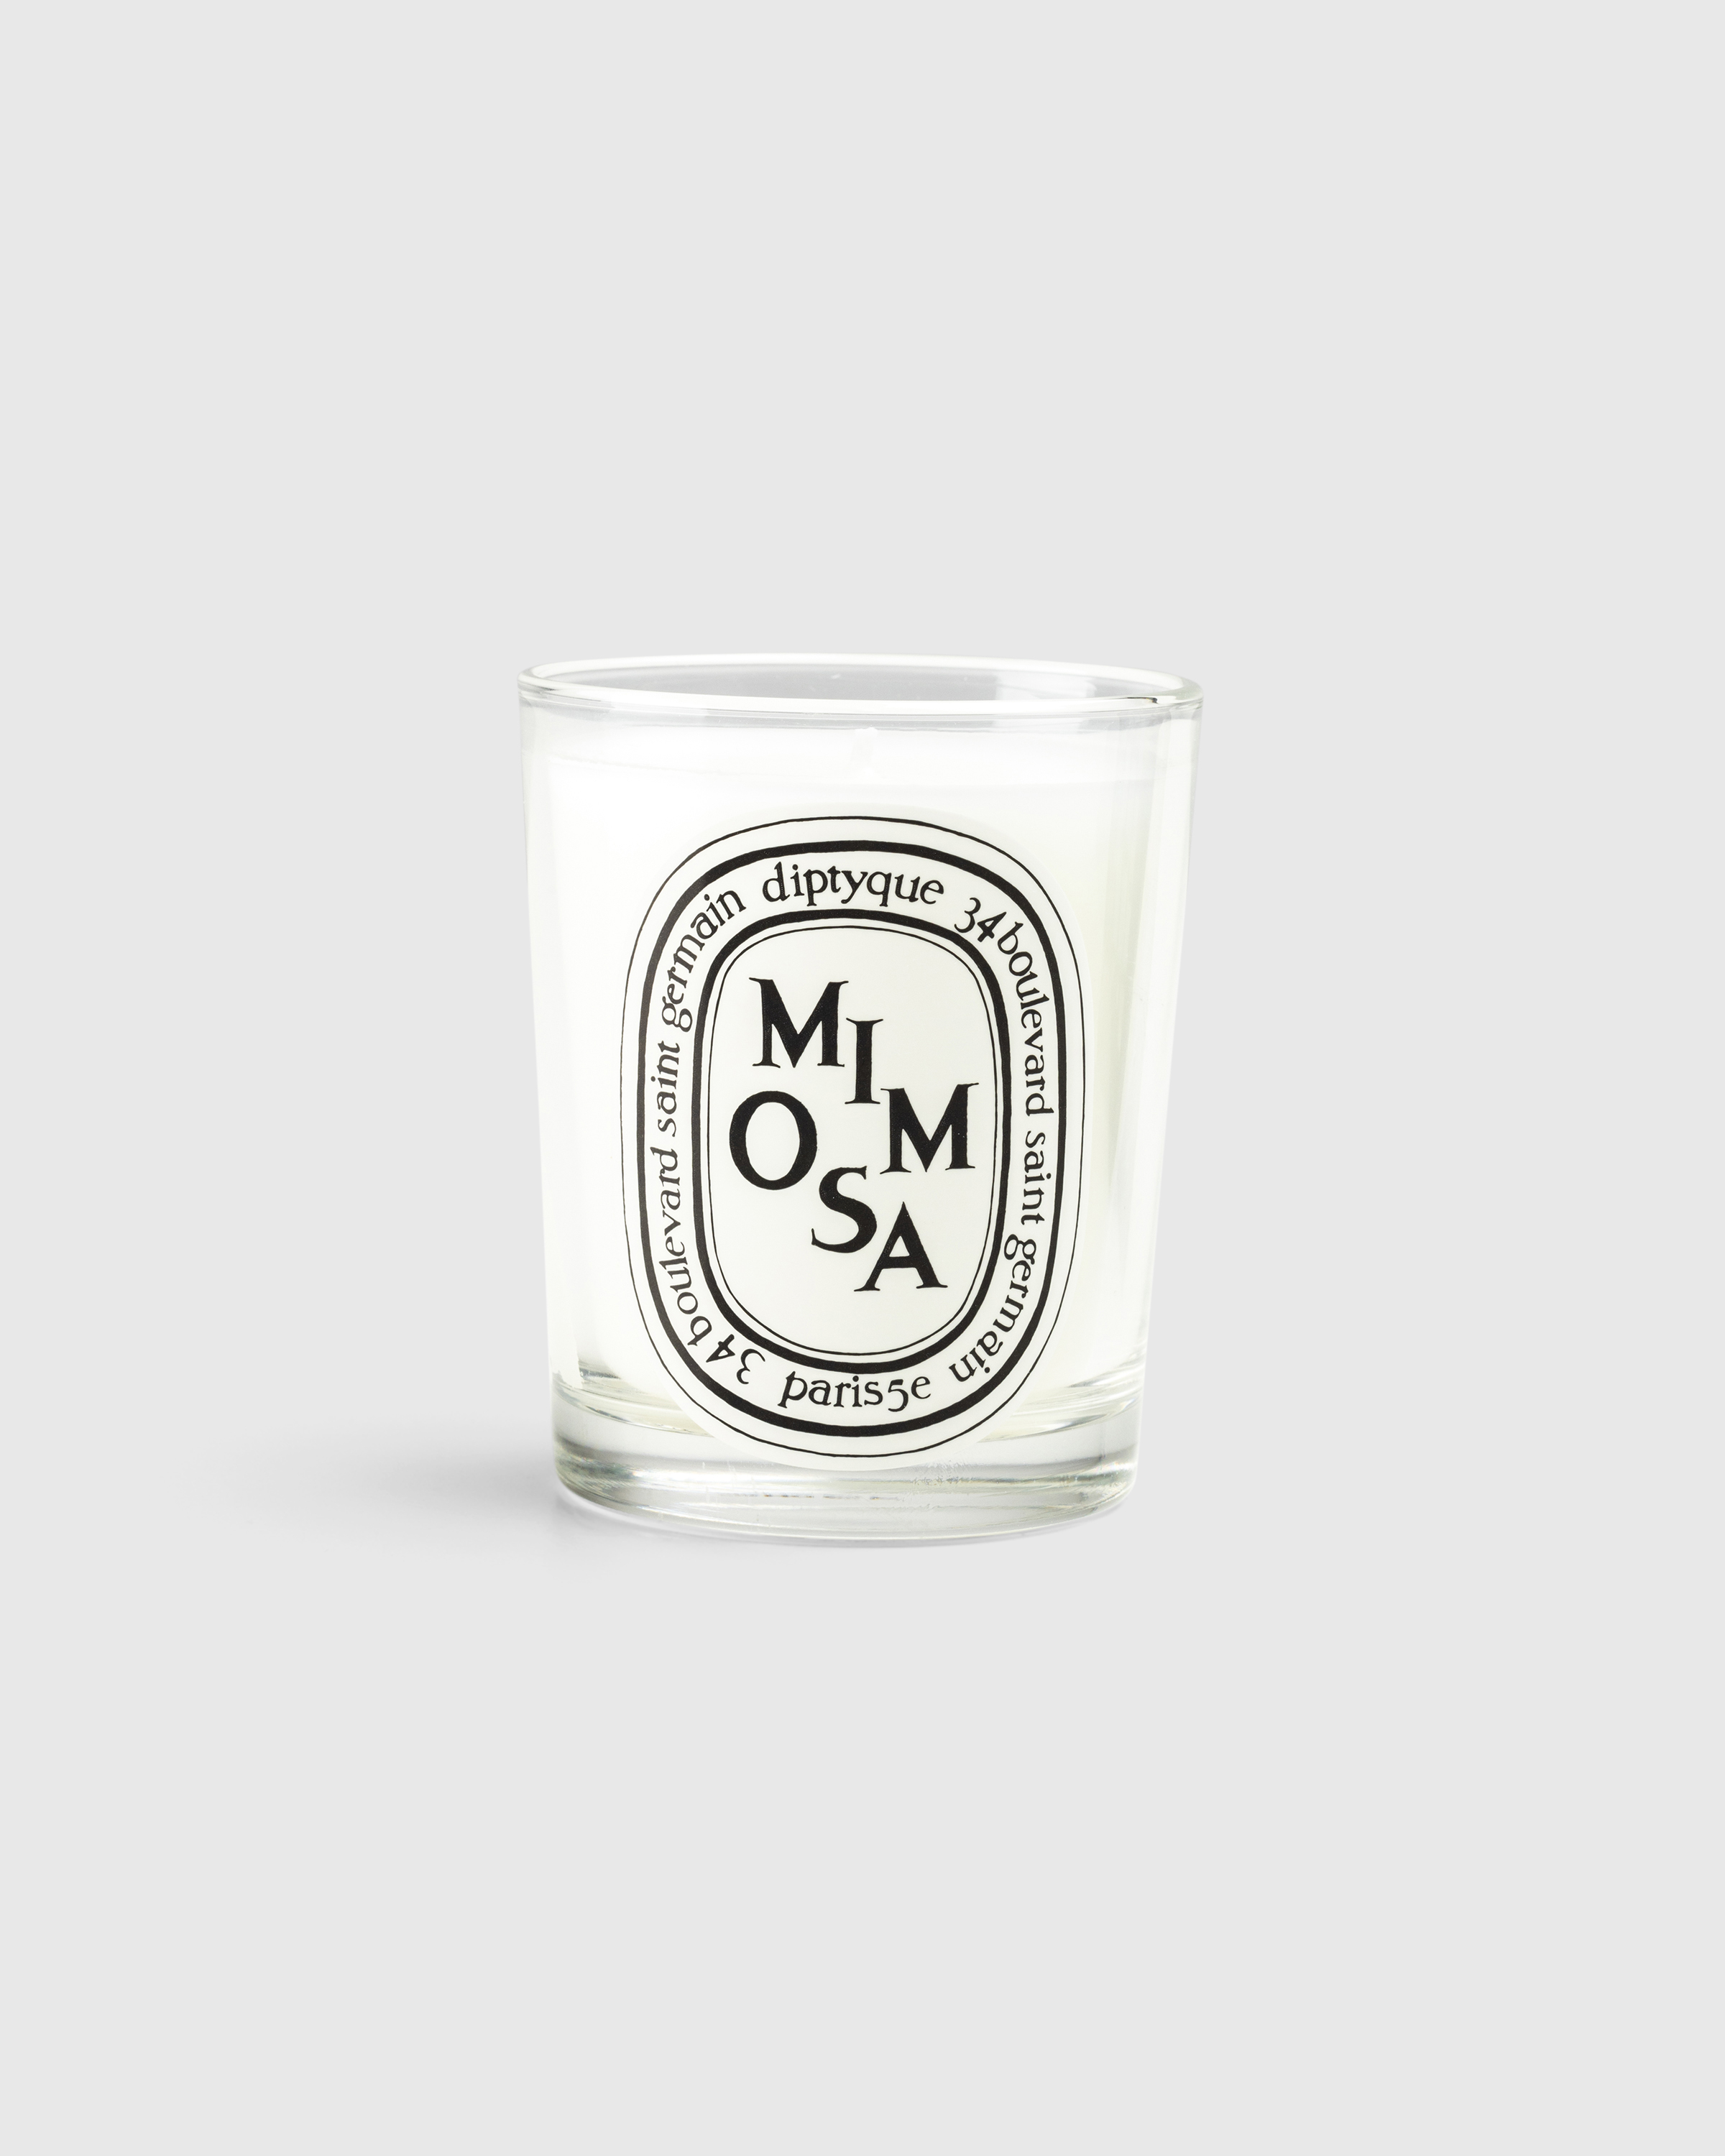 Diptyque – Standard Candle Mimosa 190g - Candles & Fragrances - Transparent - Image 1